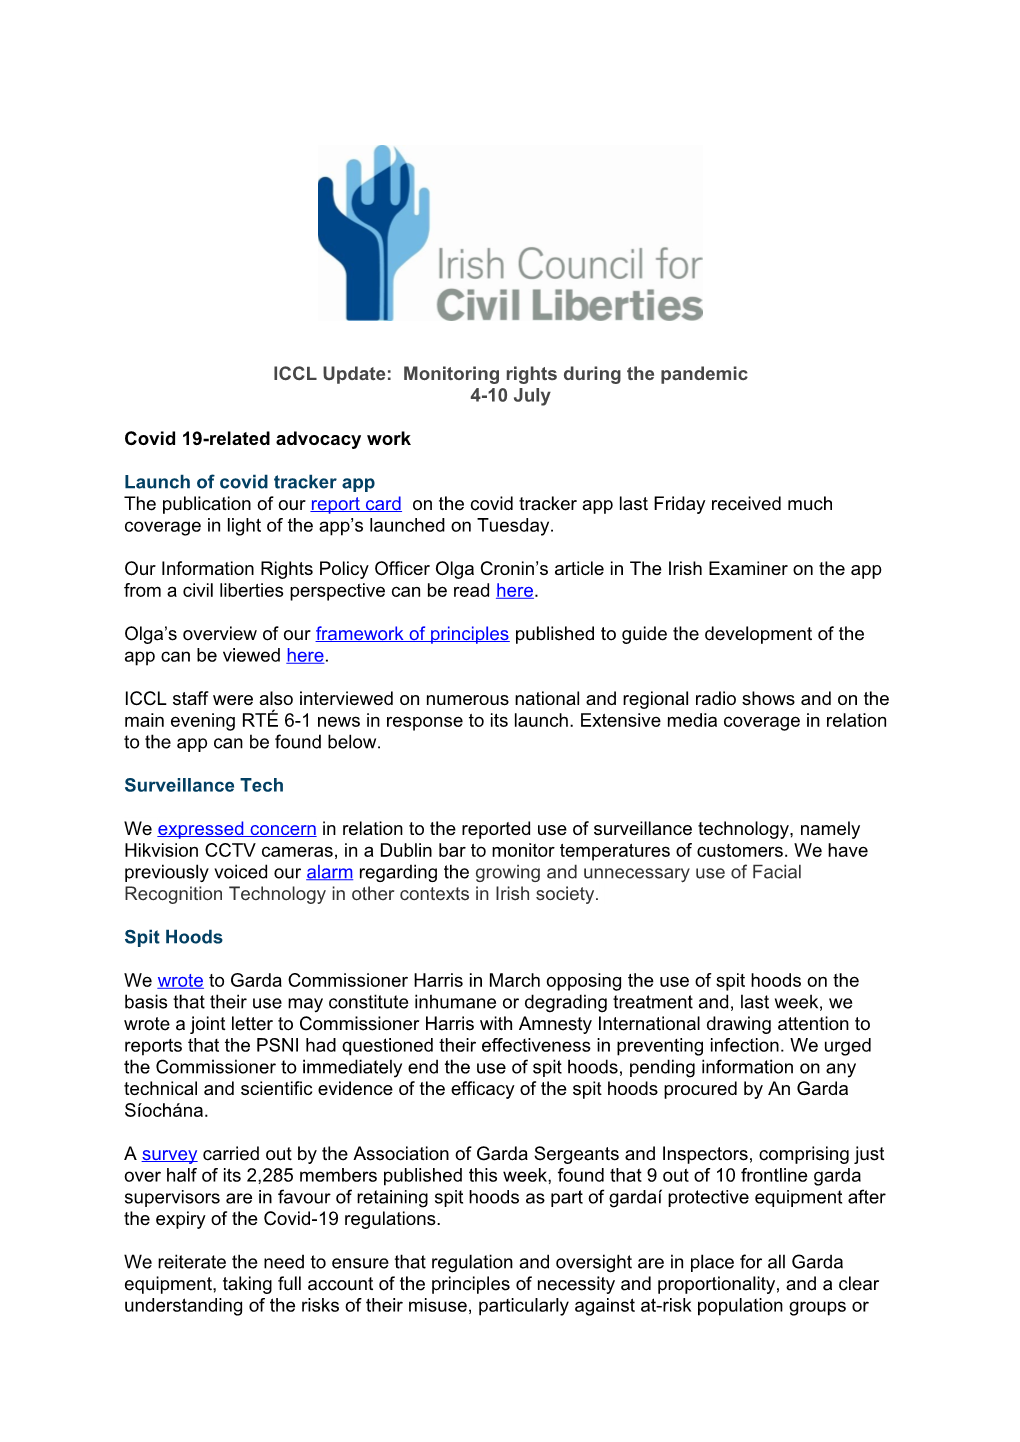 ICCL Update: Monitoring Rights During the Pandemic 4-10 July